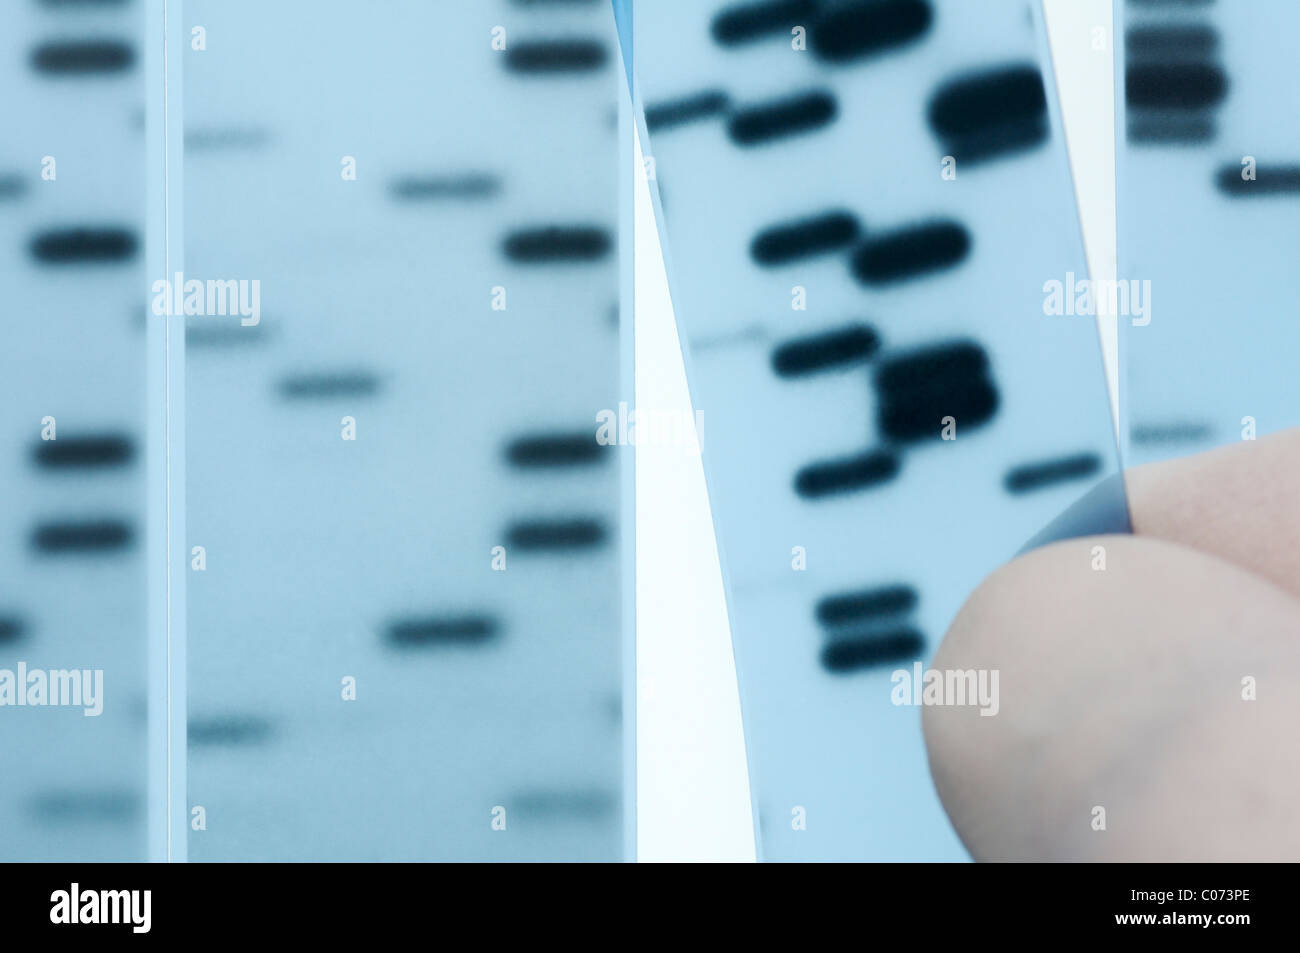 DNA sequencing. Scientist points to bands representing nucleotide bases (A,C,T,G) in an x-ray image of a gel.  Sanger method. Stock Photo